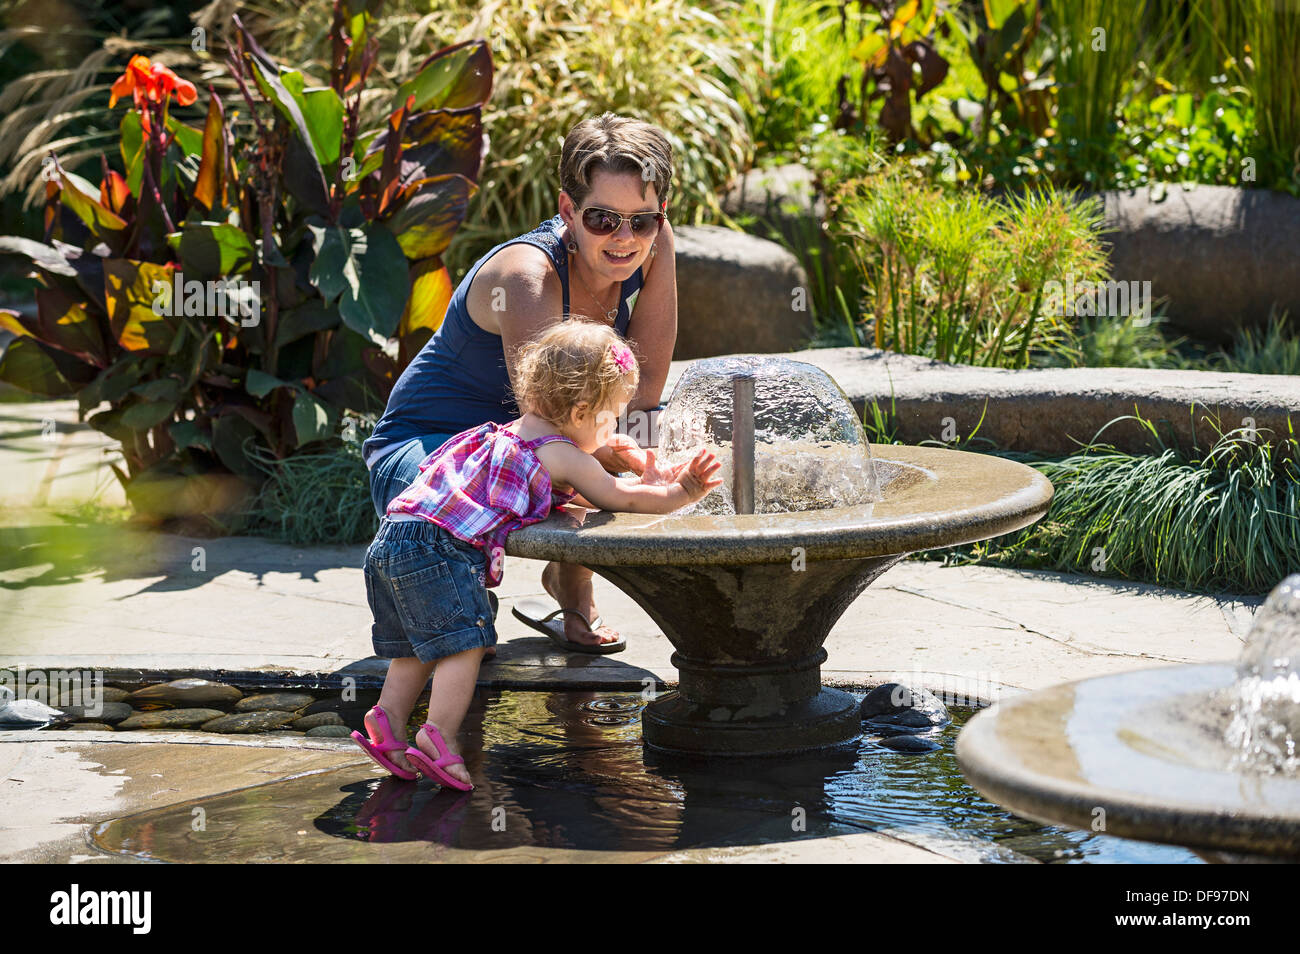 The whimsical children's garden at the Huntington Library and Botanical Gardens. Stock Photo